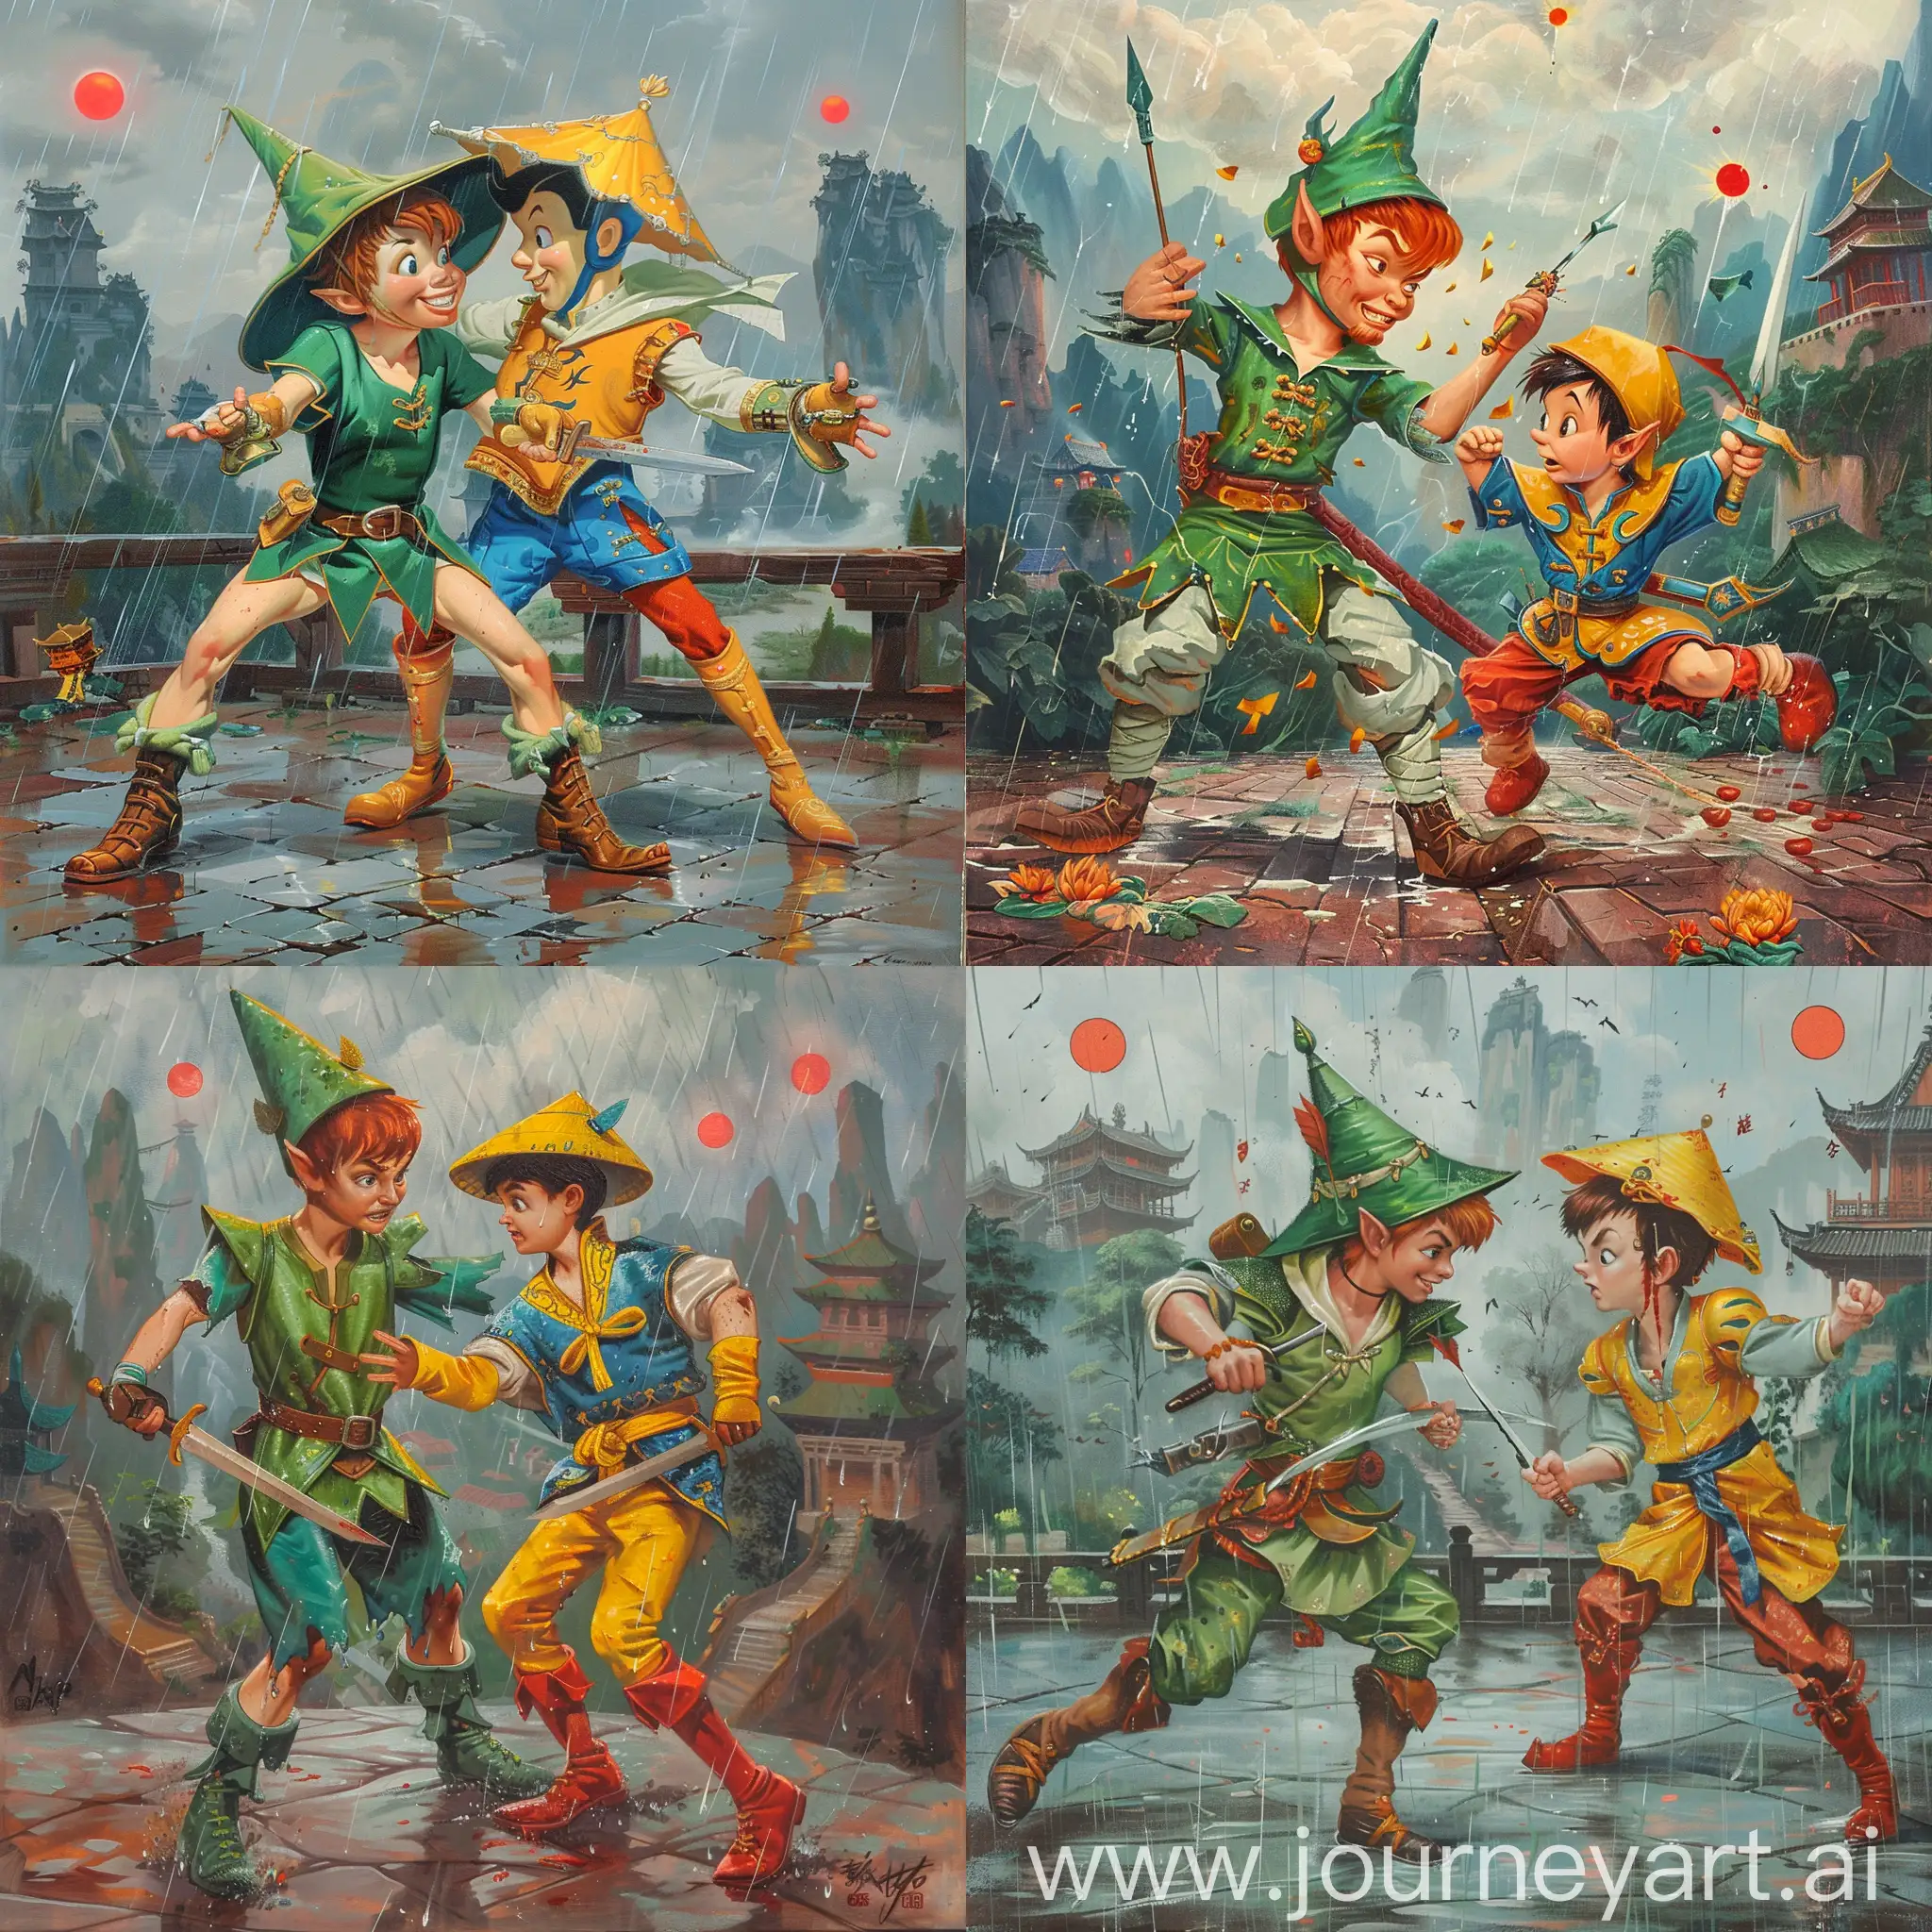 Disney-Characters-Peter-Pan-and-Pinocchio-in-Chinese-Style-Armor-Dueling-at-the-Luoyang-Buddhist-Longmen-Grottoes